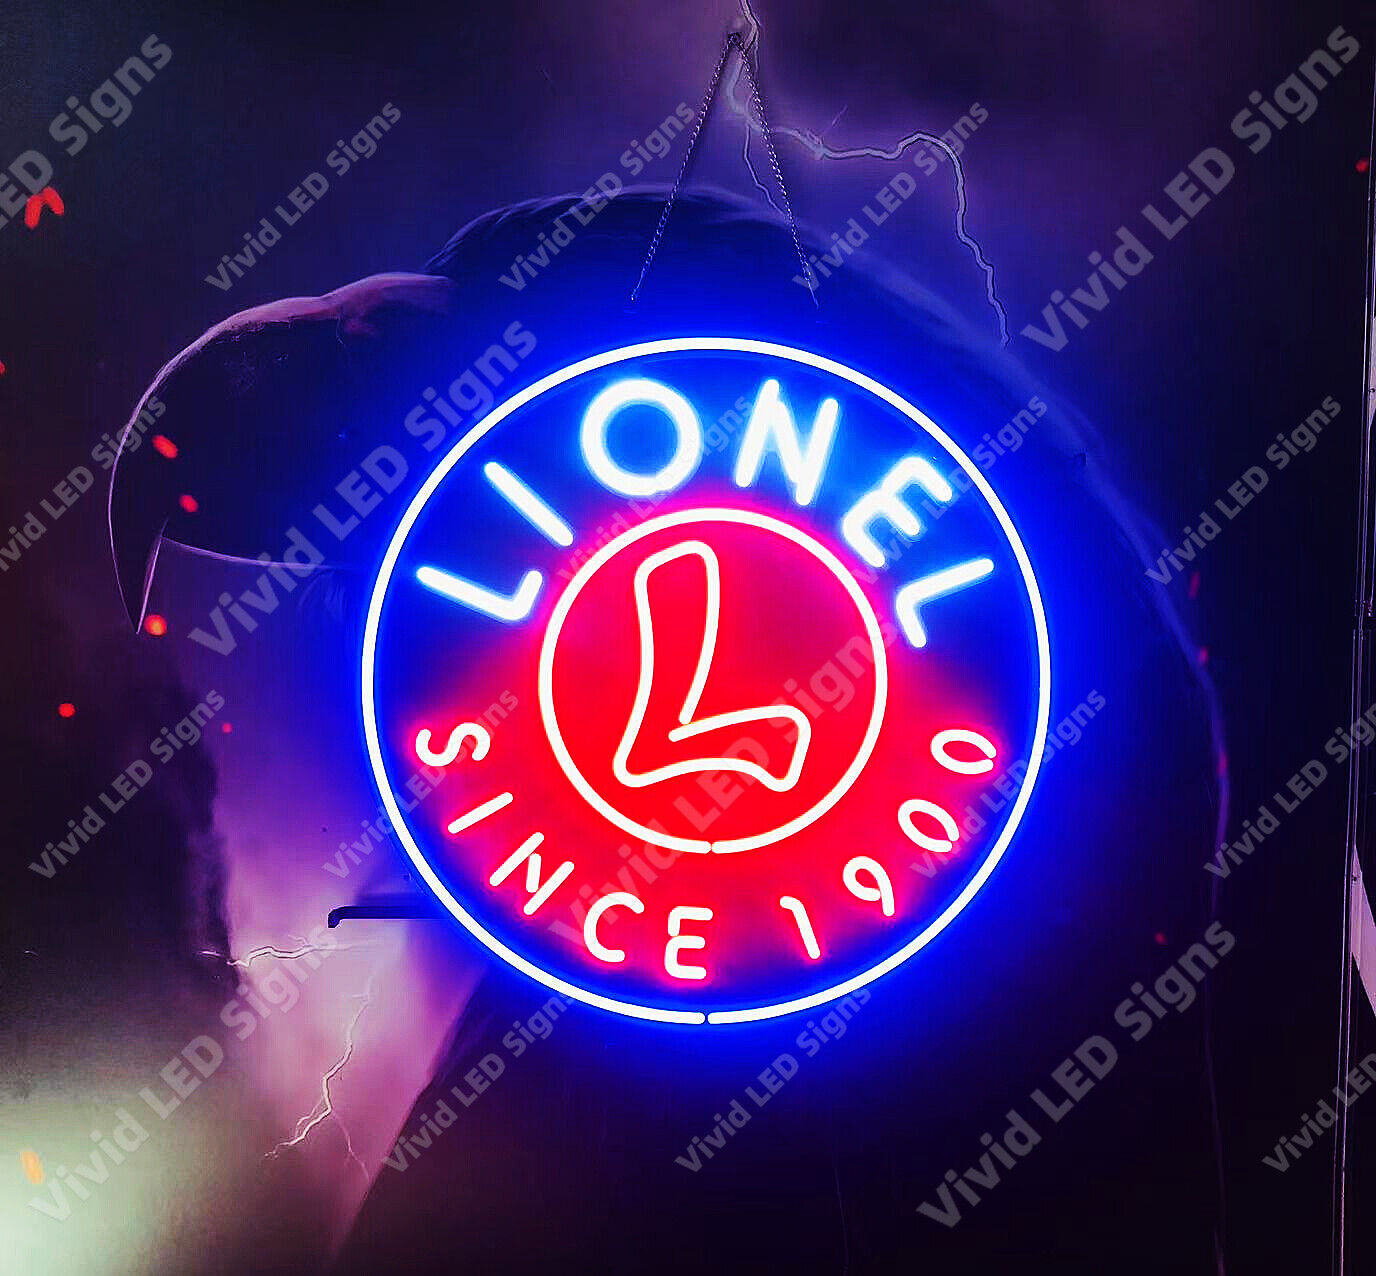 Lionel Trains Since 1900 Vivid LED Neon Sign Light Lamp With Dimmer